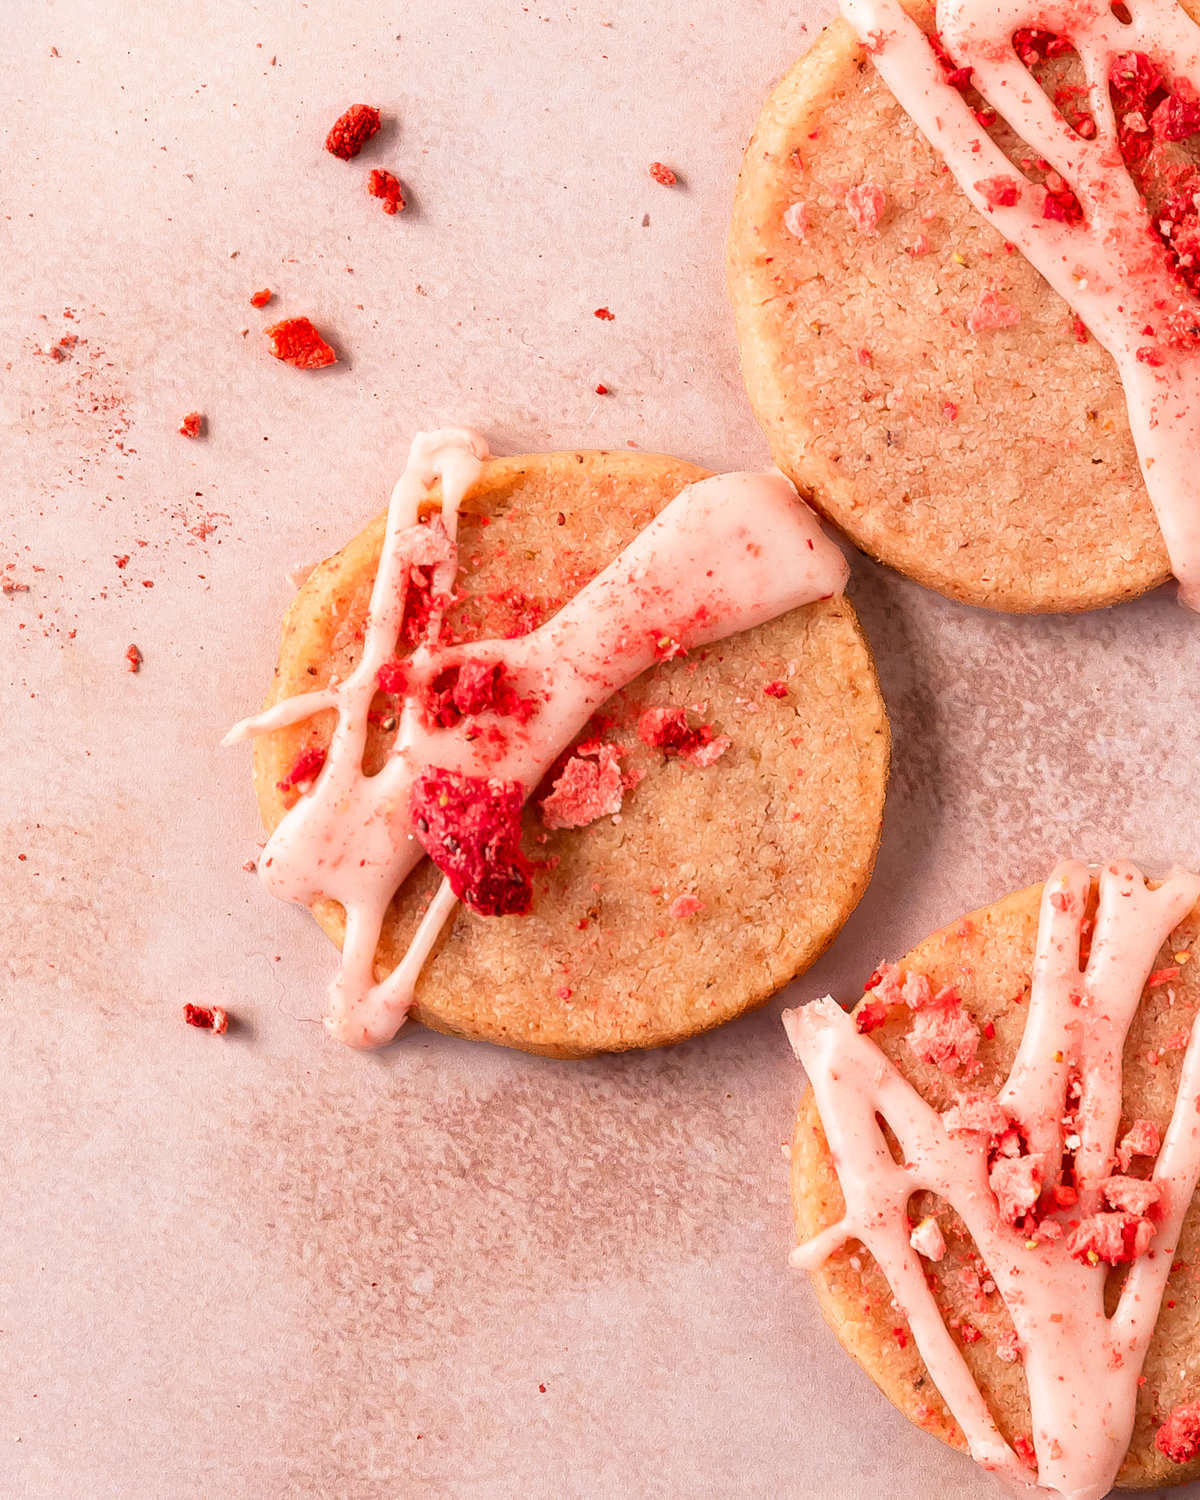 Strawberry shortbread cookies are buttery shortbread cookies filled with sweet and tart strawberry flavor. These strawberry butter cookies get their pink hue and berry flavor thanks to freeze dried strawberries in both the cookie and glaze. Make these pink shortbread cookies for a taste of spring and summer all year long.